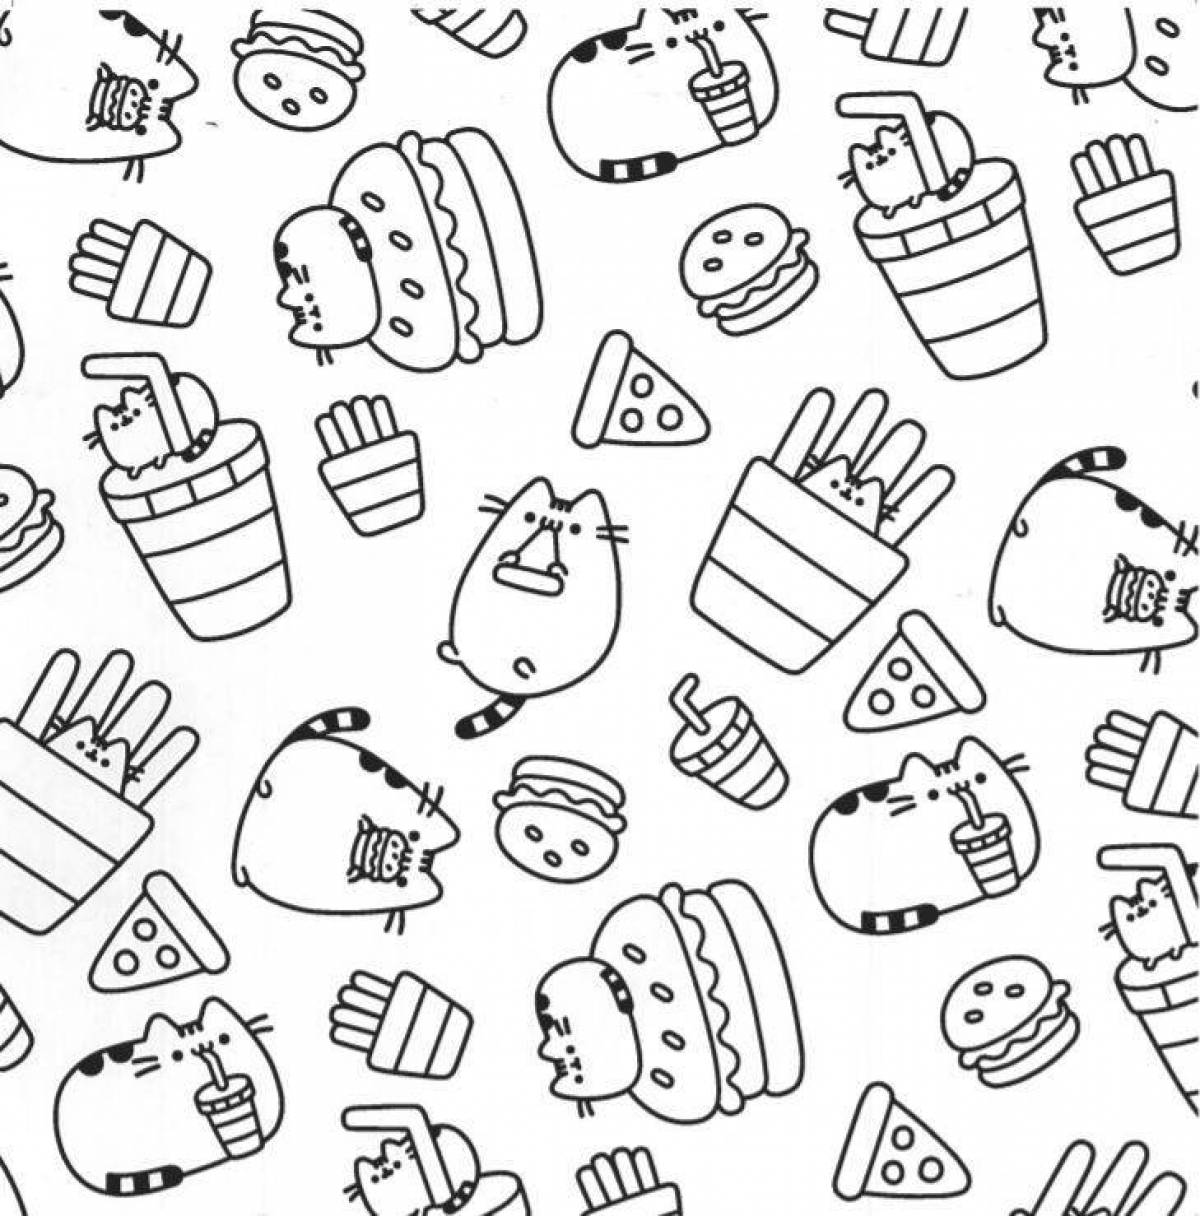 Luminous coloring pages, small stickers